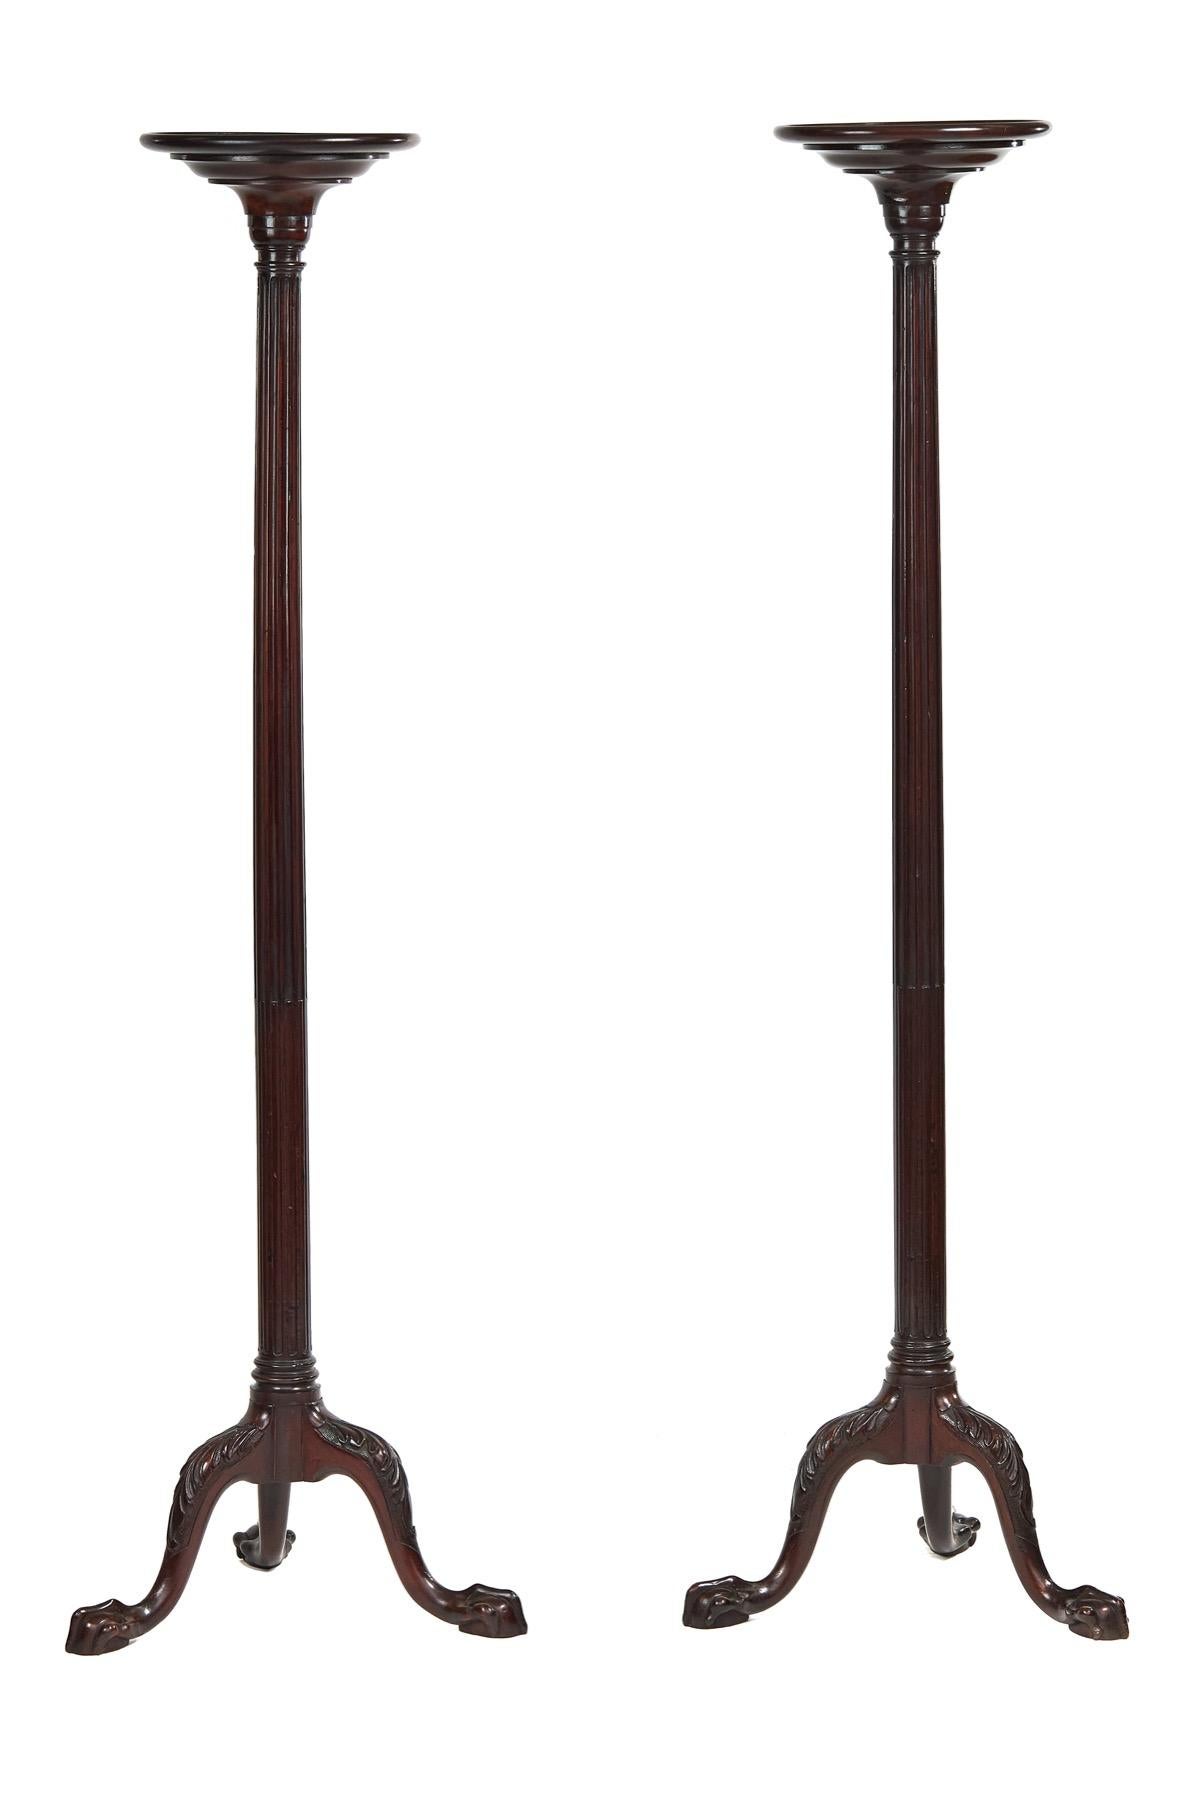 Fine Pair Edwardian Mahogany & Carved Torchere Stands,
Circular Dished tops.
Reeded Columns
Tripod Base,
Legs with Leaf carving on knees , Carved claw & Ball Feet,
Recently Polished
Very Good Quality.